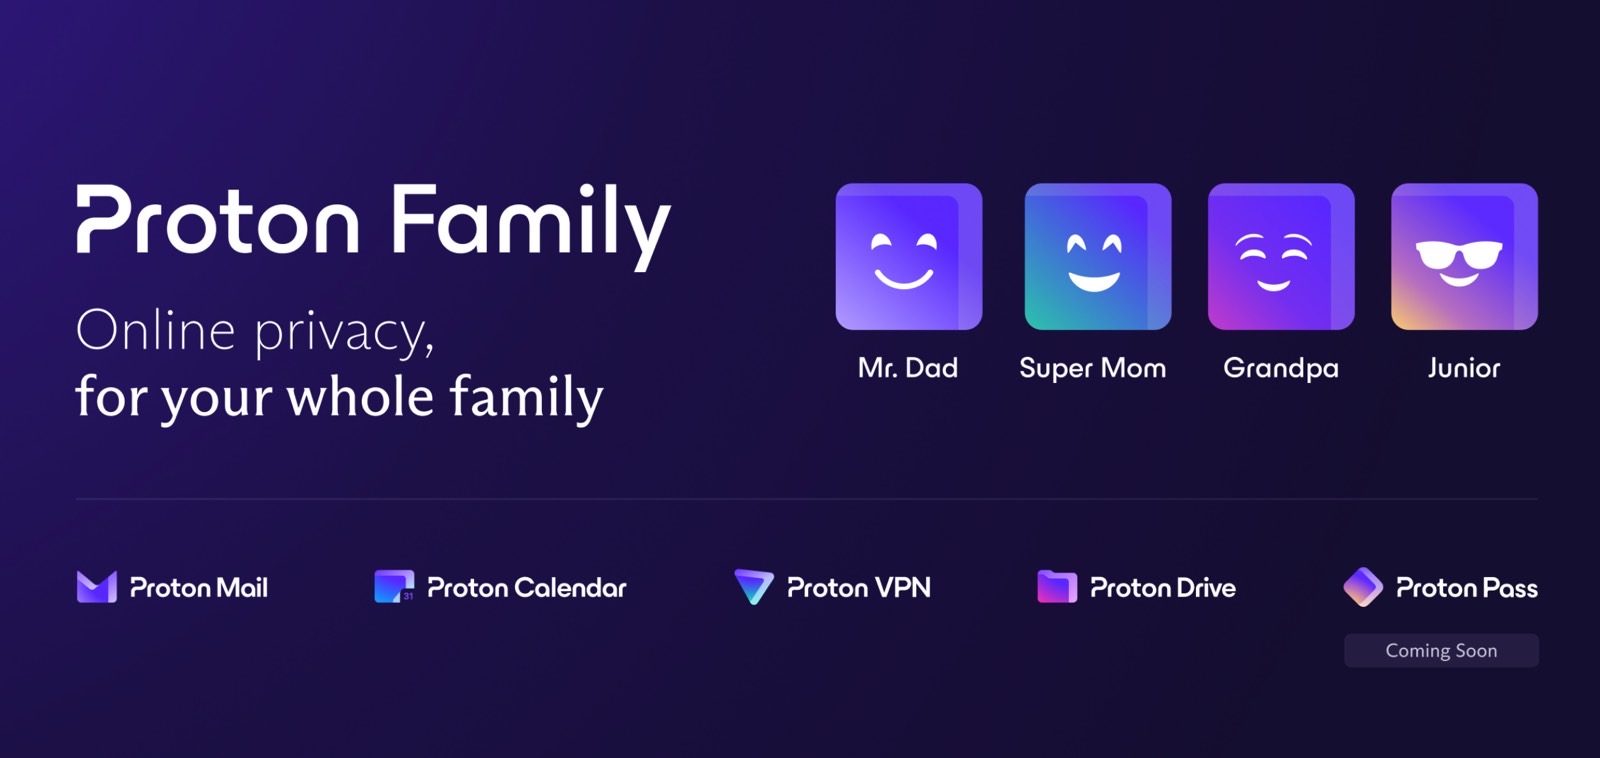 Proton's new Family plan is tempting me to spend even more on encryption